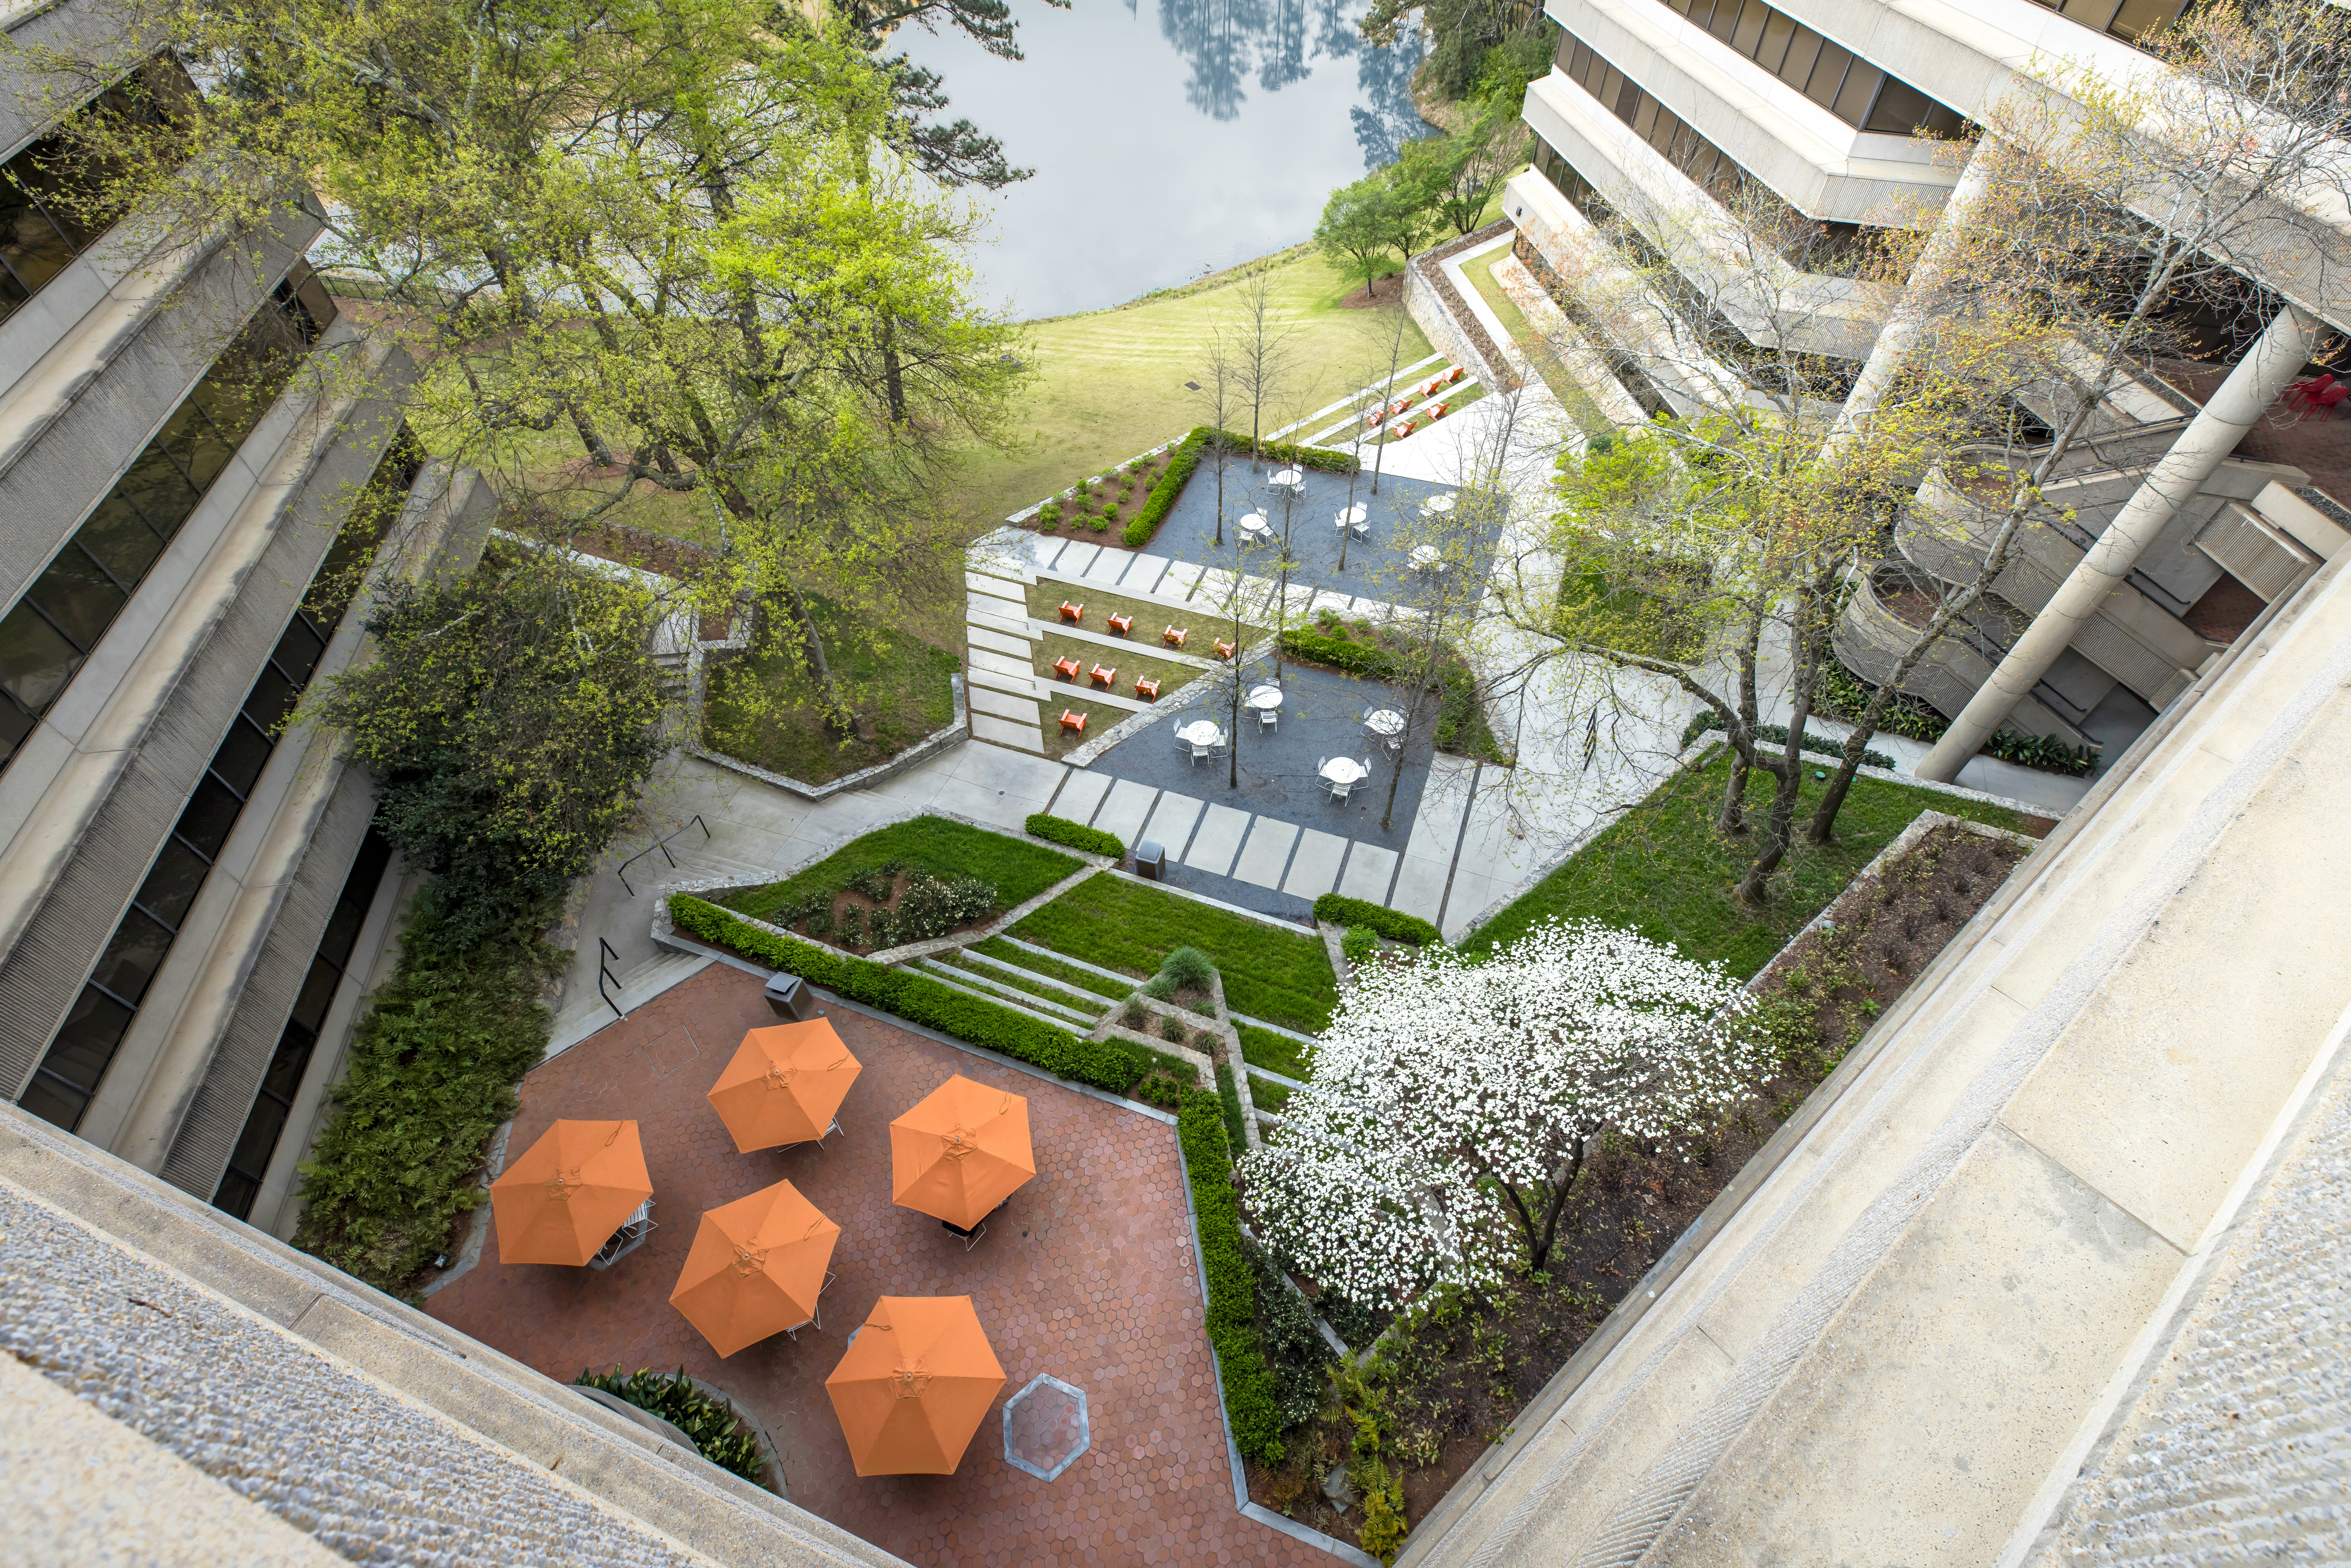 an aerial view of the Palisades courtyard shows lush green landscaping, an array of seating, and large orange umbrellas.